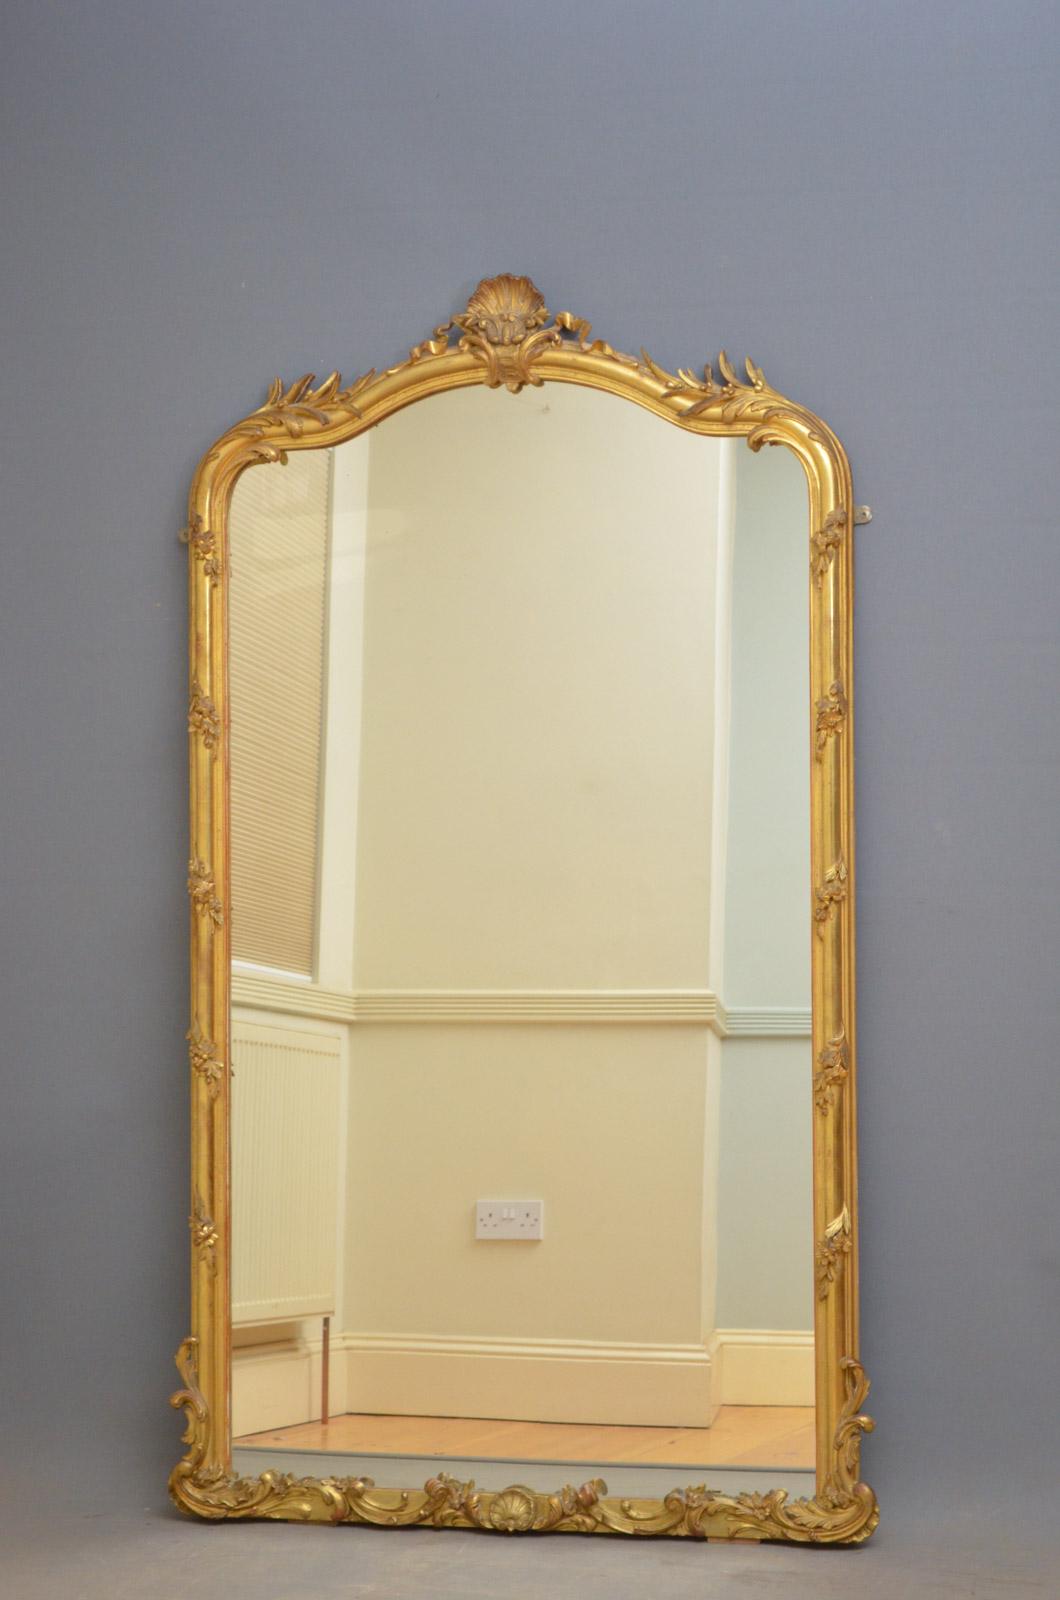 Sn4624 superb French wall or floor mirror, having original glass with some foxing and imperfection in stunning frame with floral motifs and shell crest to centre. This antique mirror retains original glass, gilt and panelled backboard, all in home